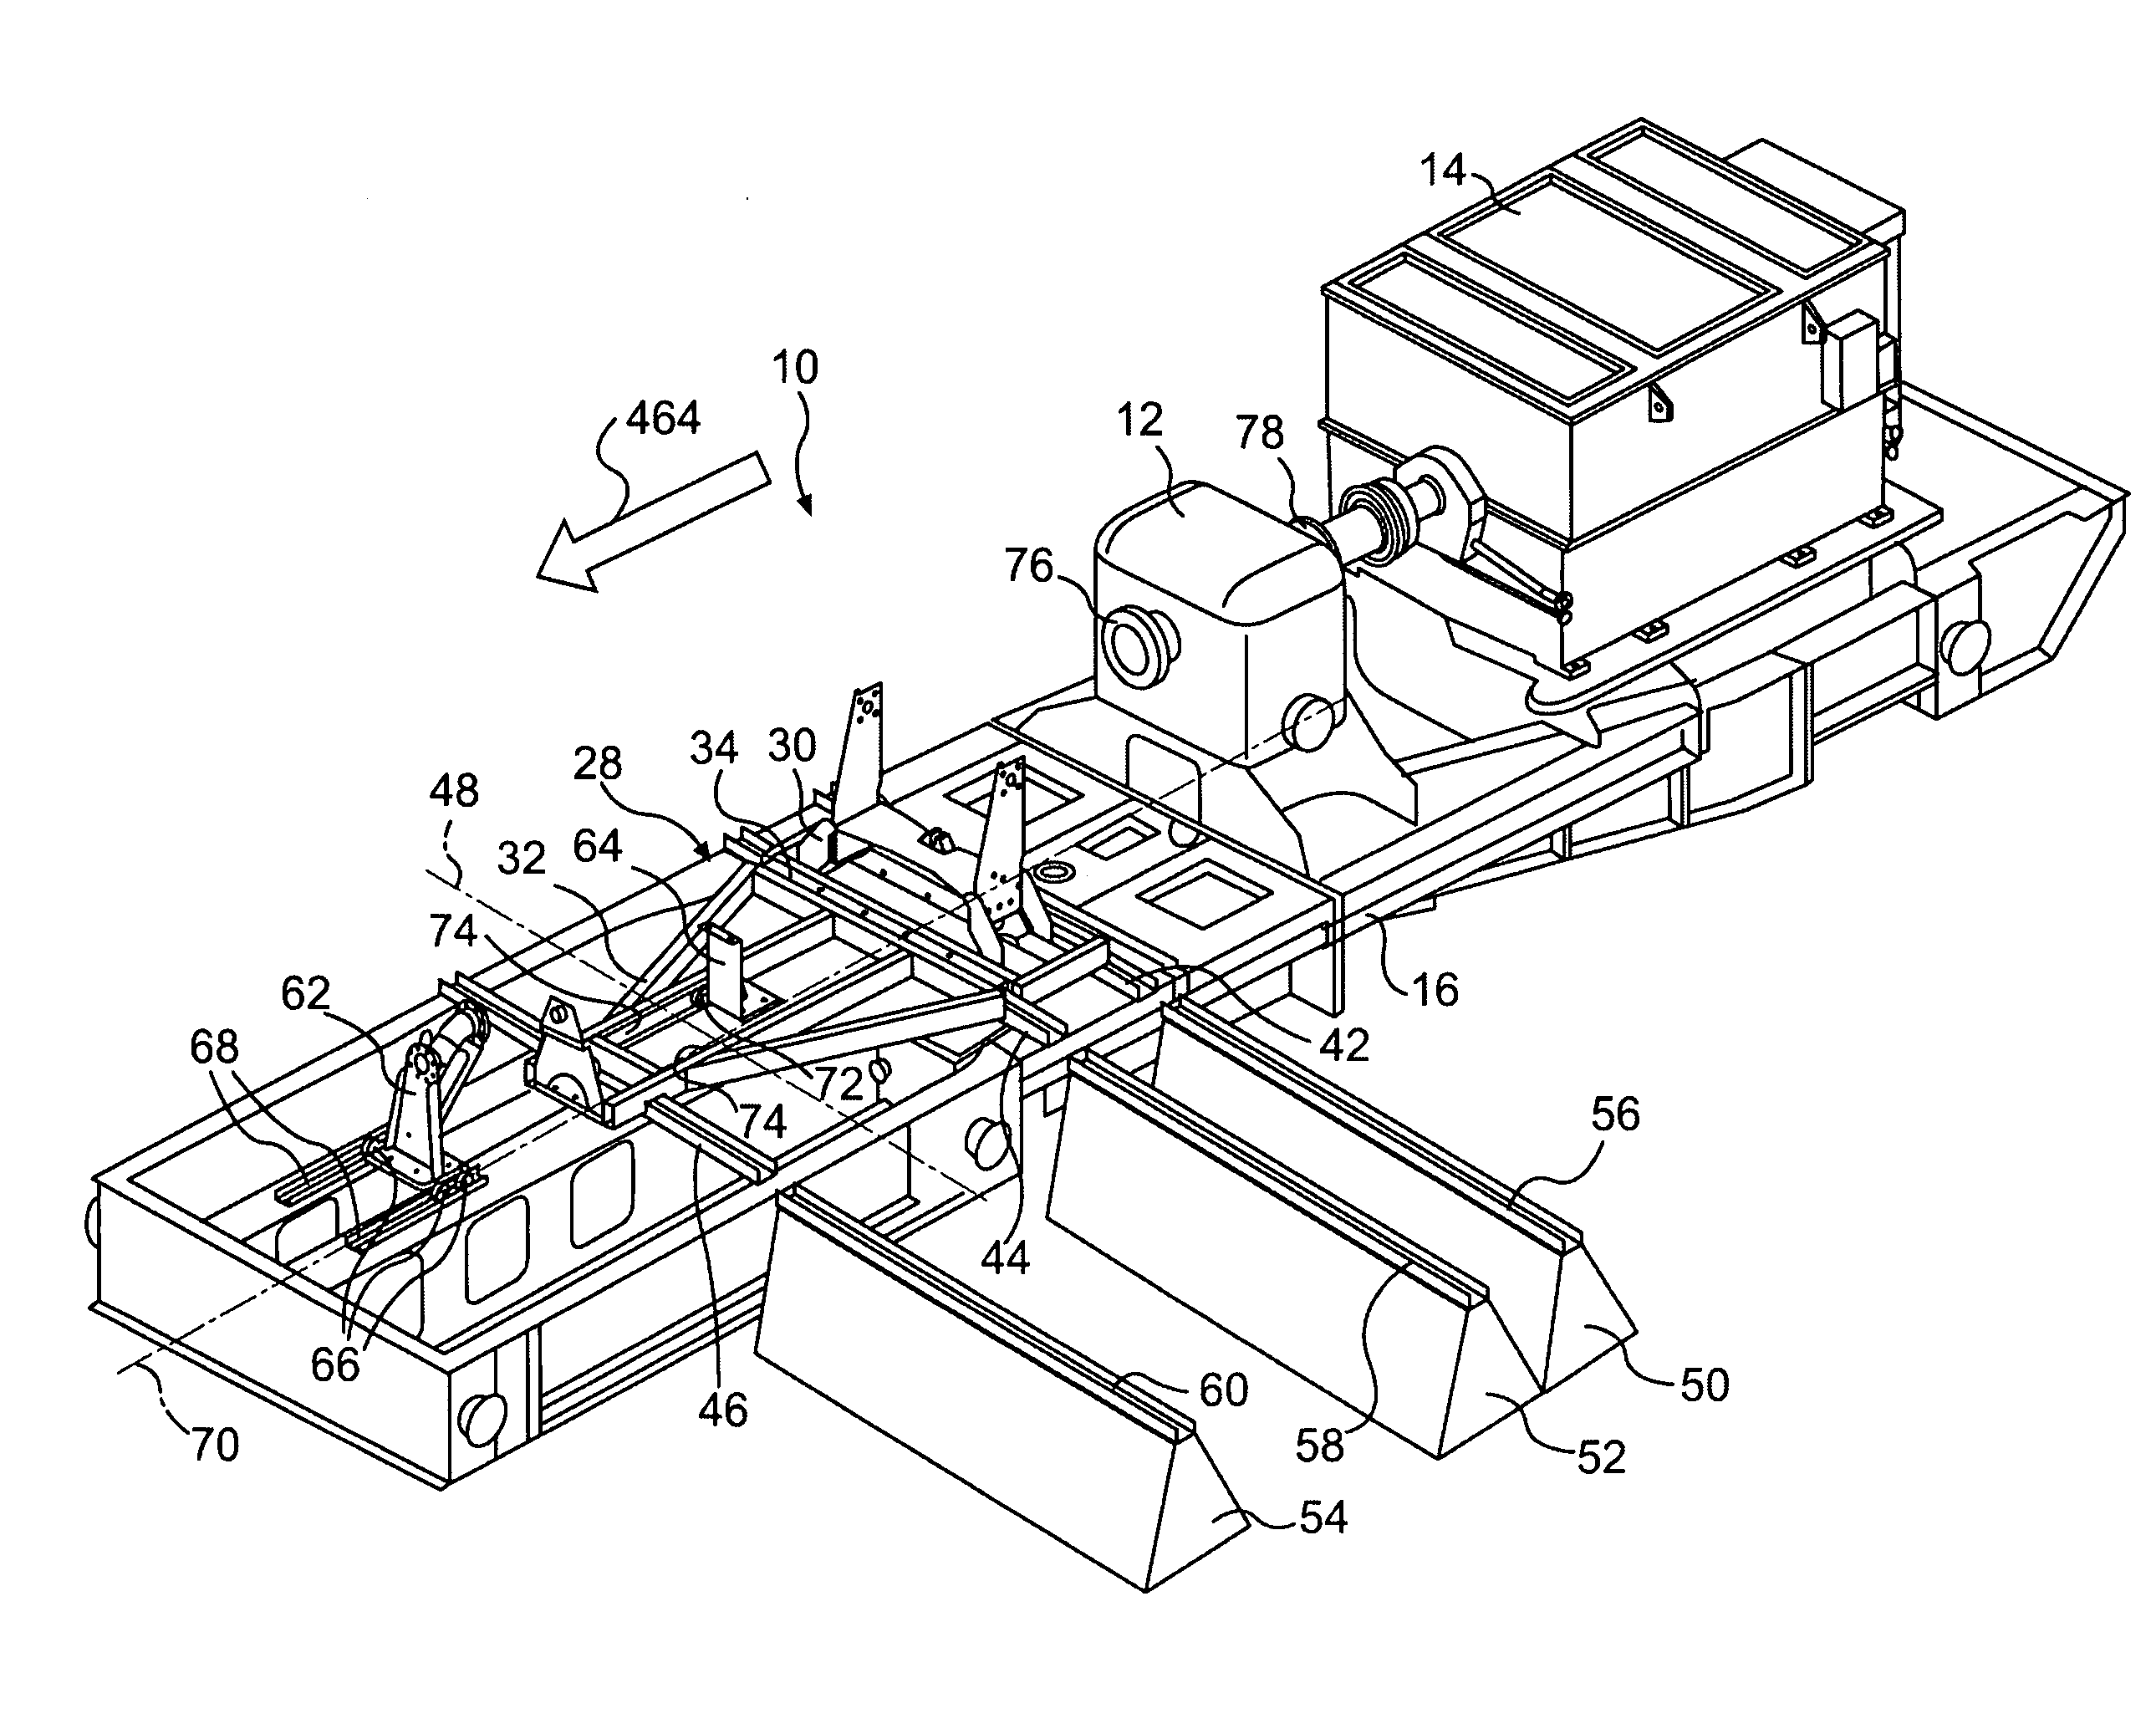 System for supporting and servicing a gas turbine engine